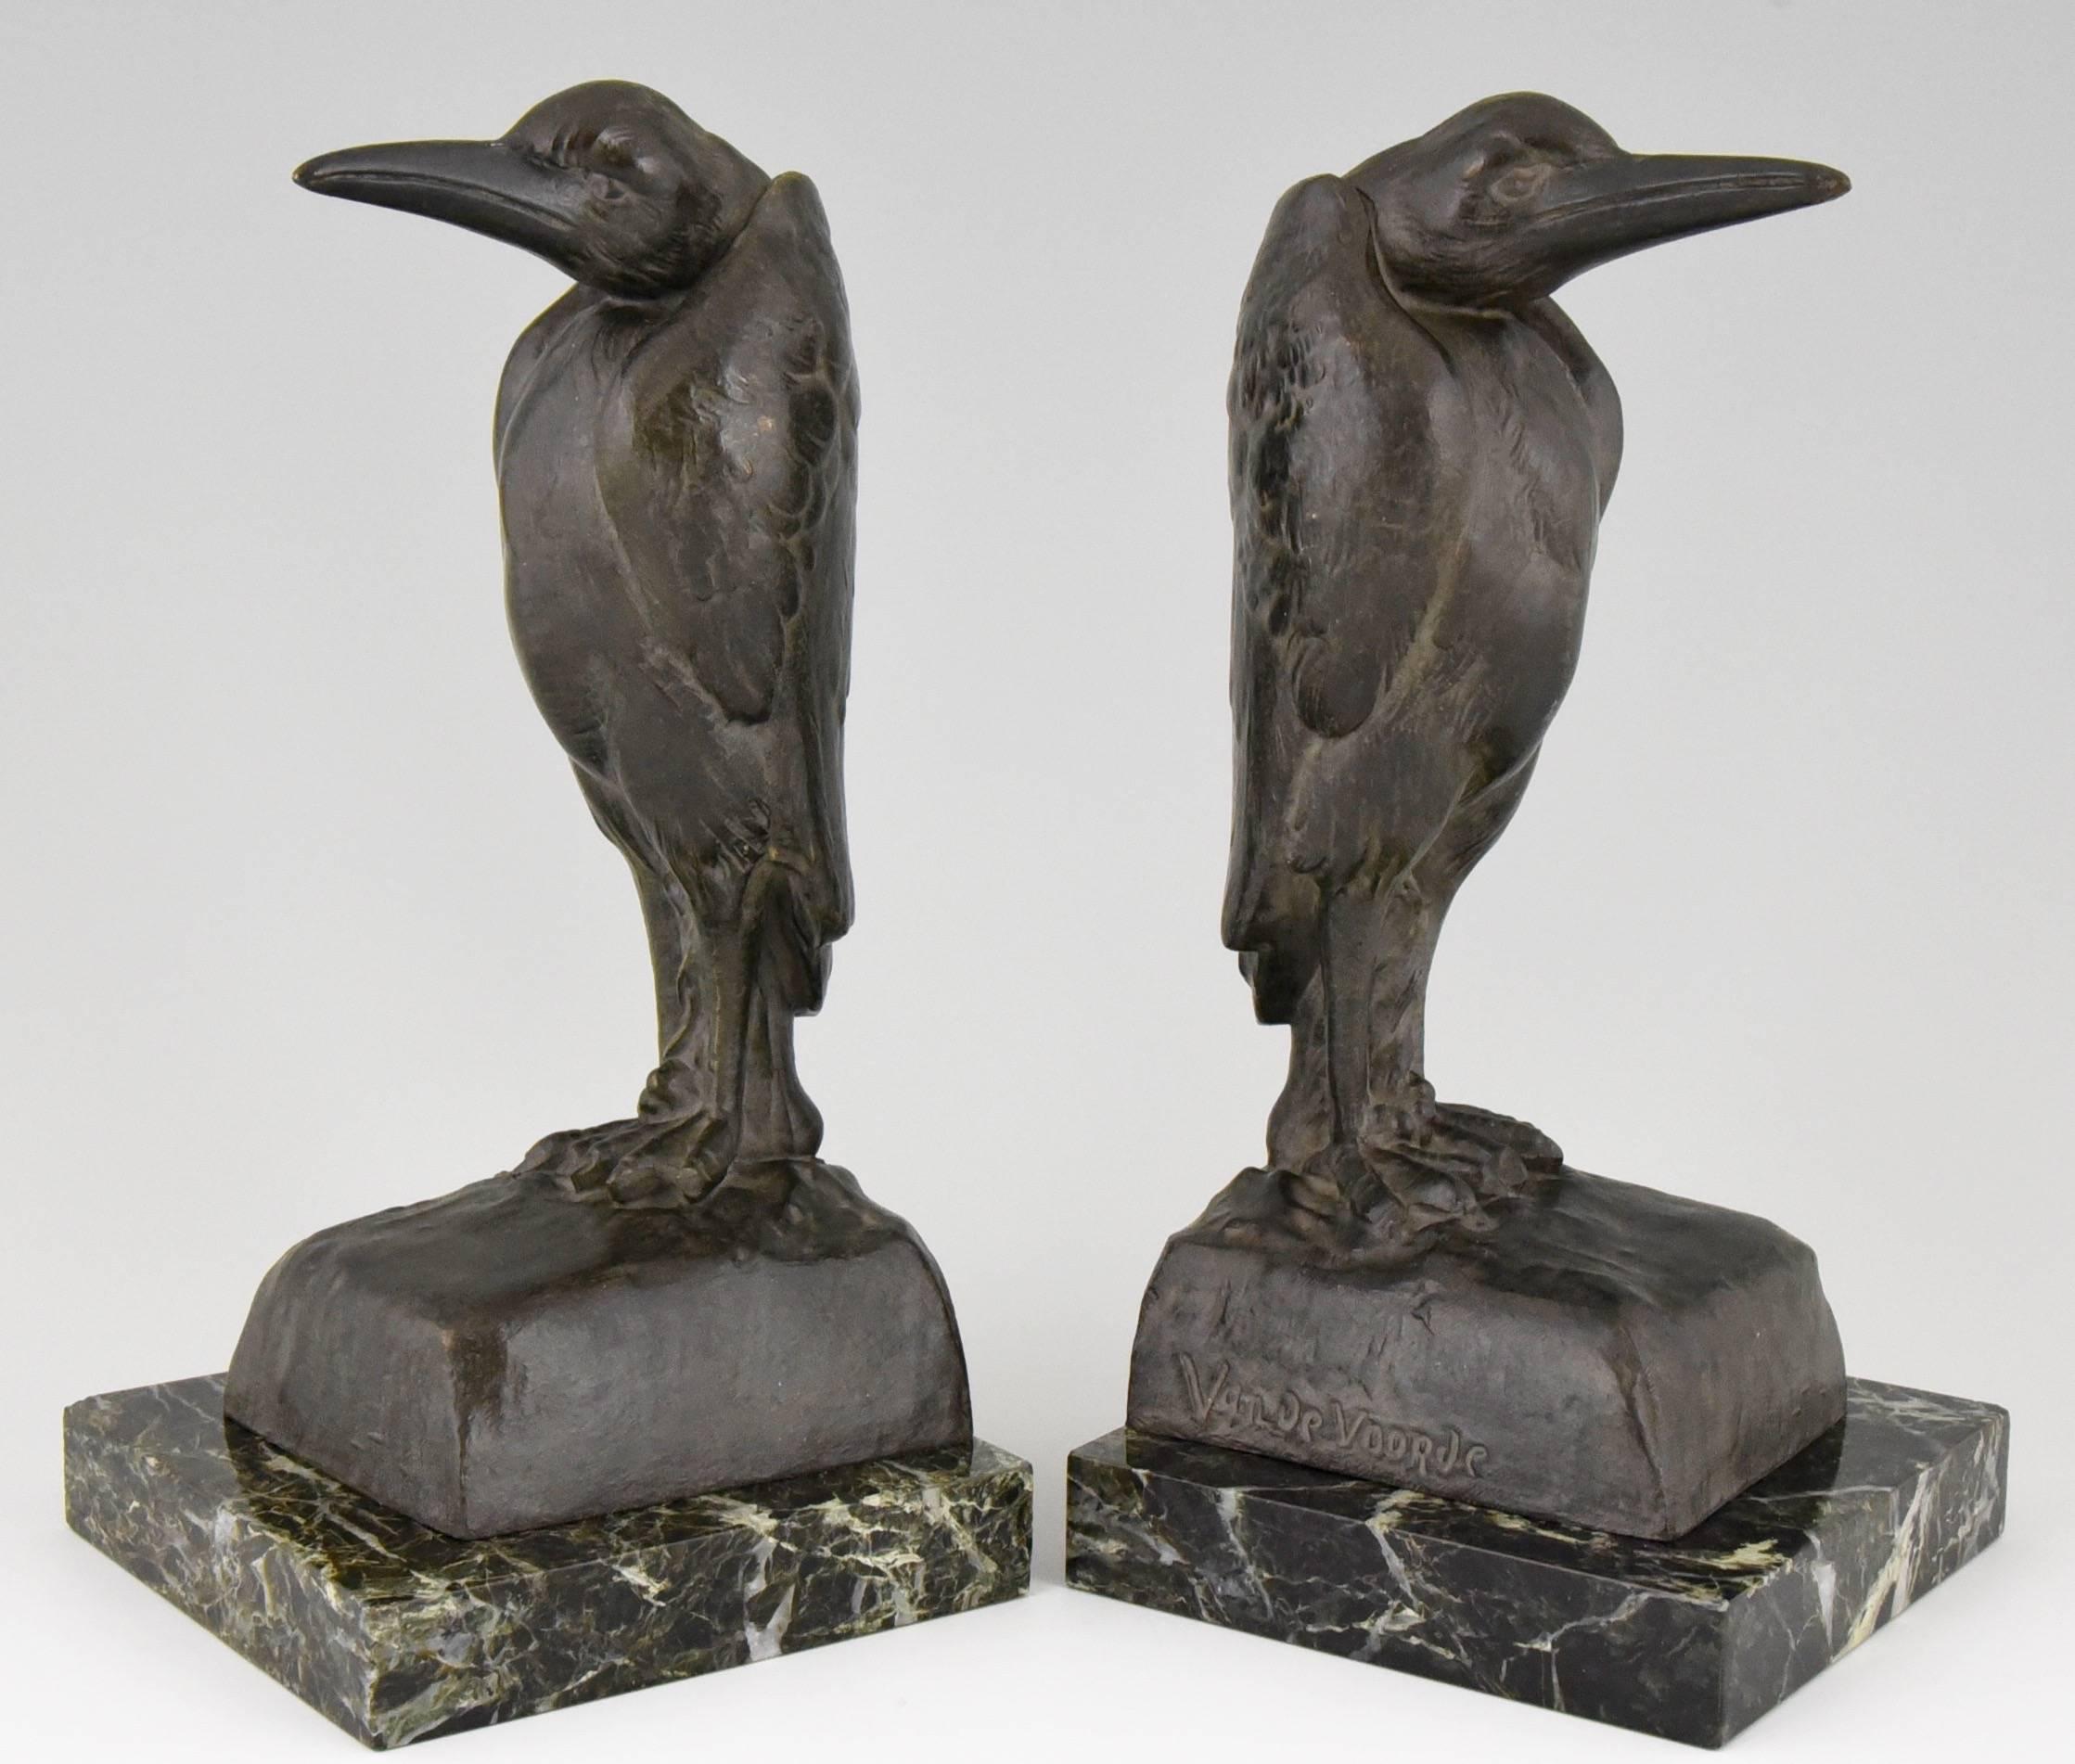 Patinated French Art Deco Marabou Bookends by Georges Van de Voorde, 1930